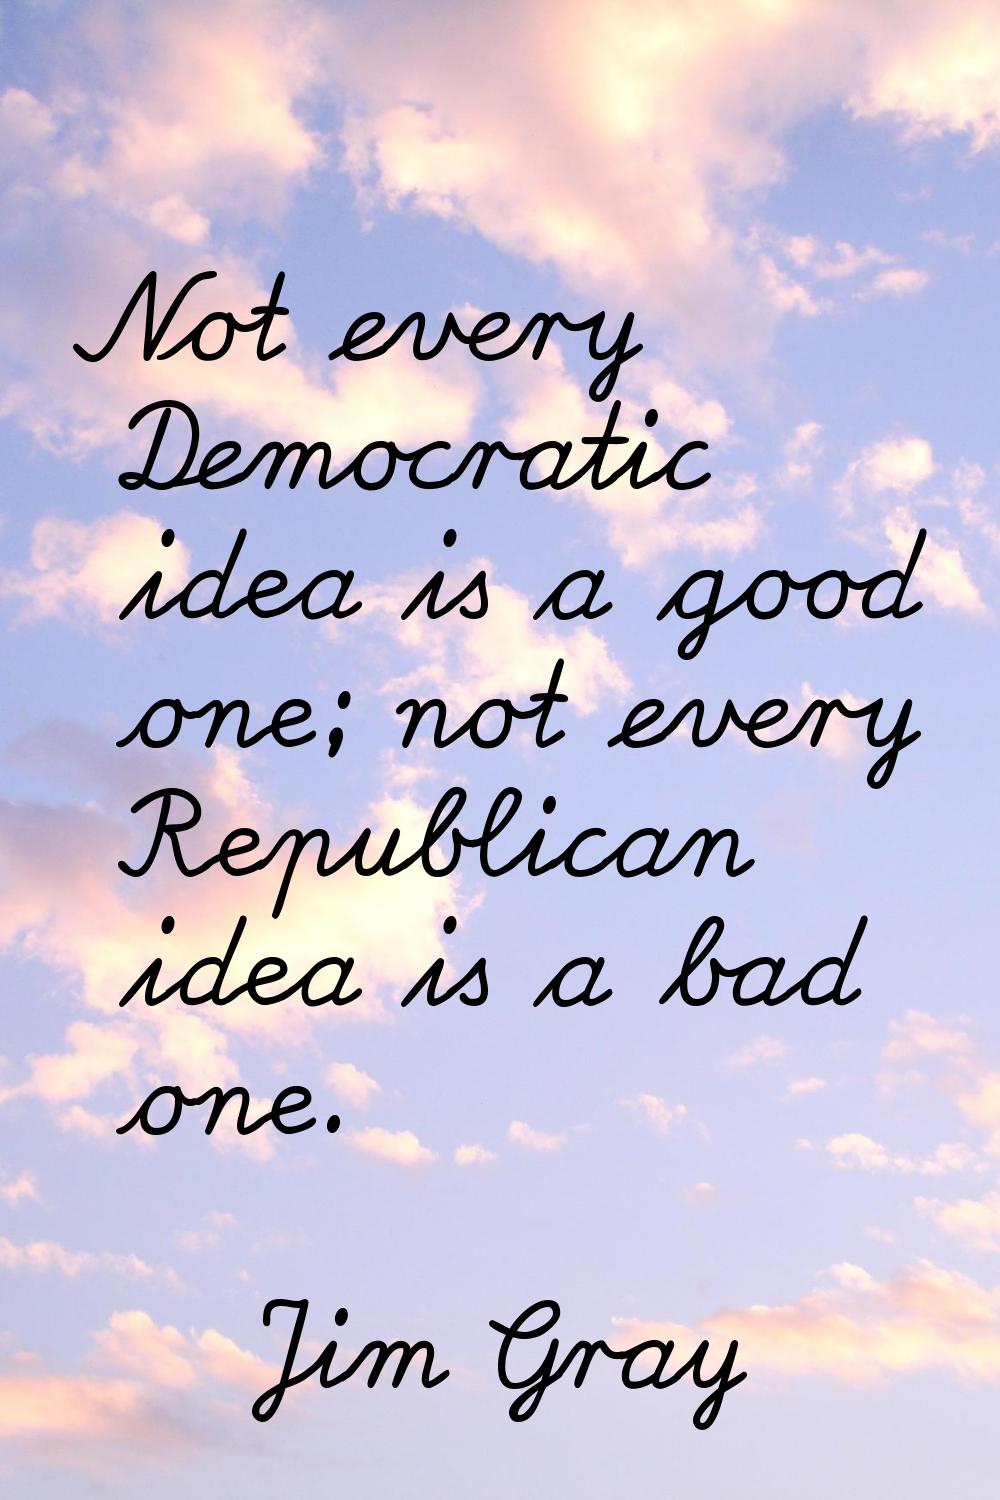 Not every Democratic idea is a good one; not every Republican idea is a bad one.